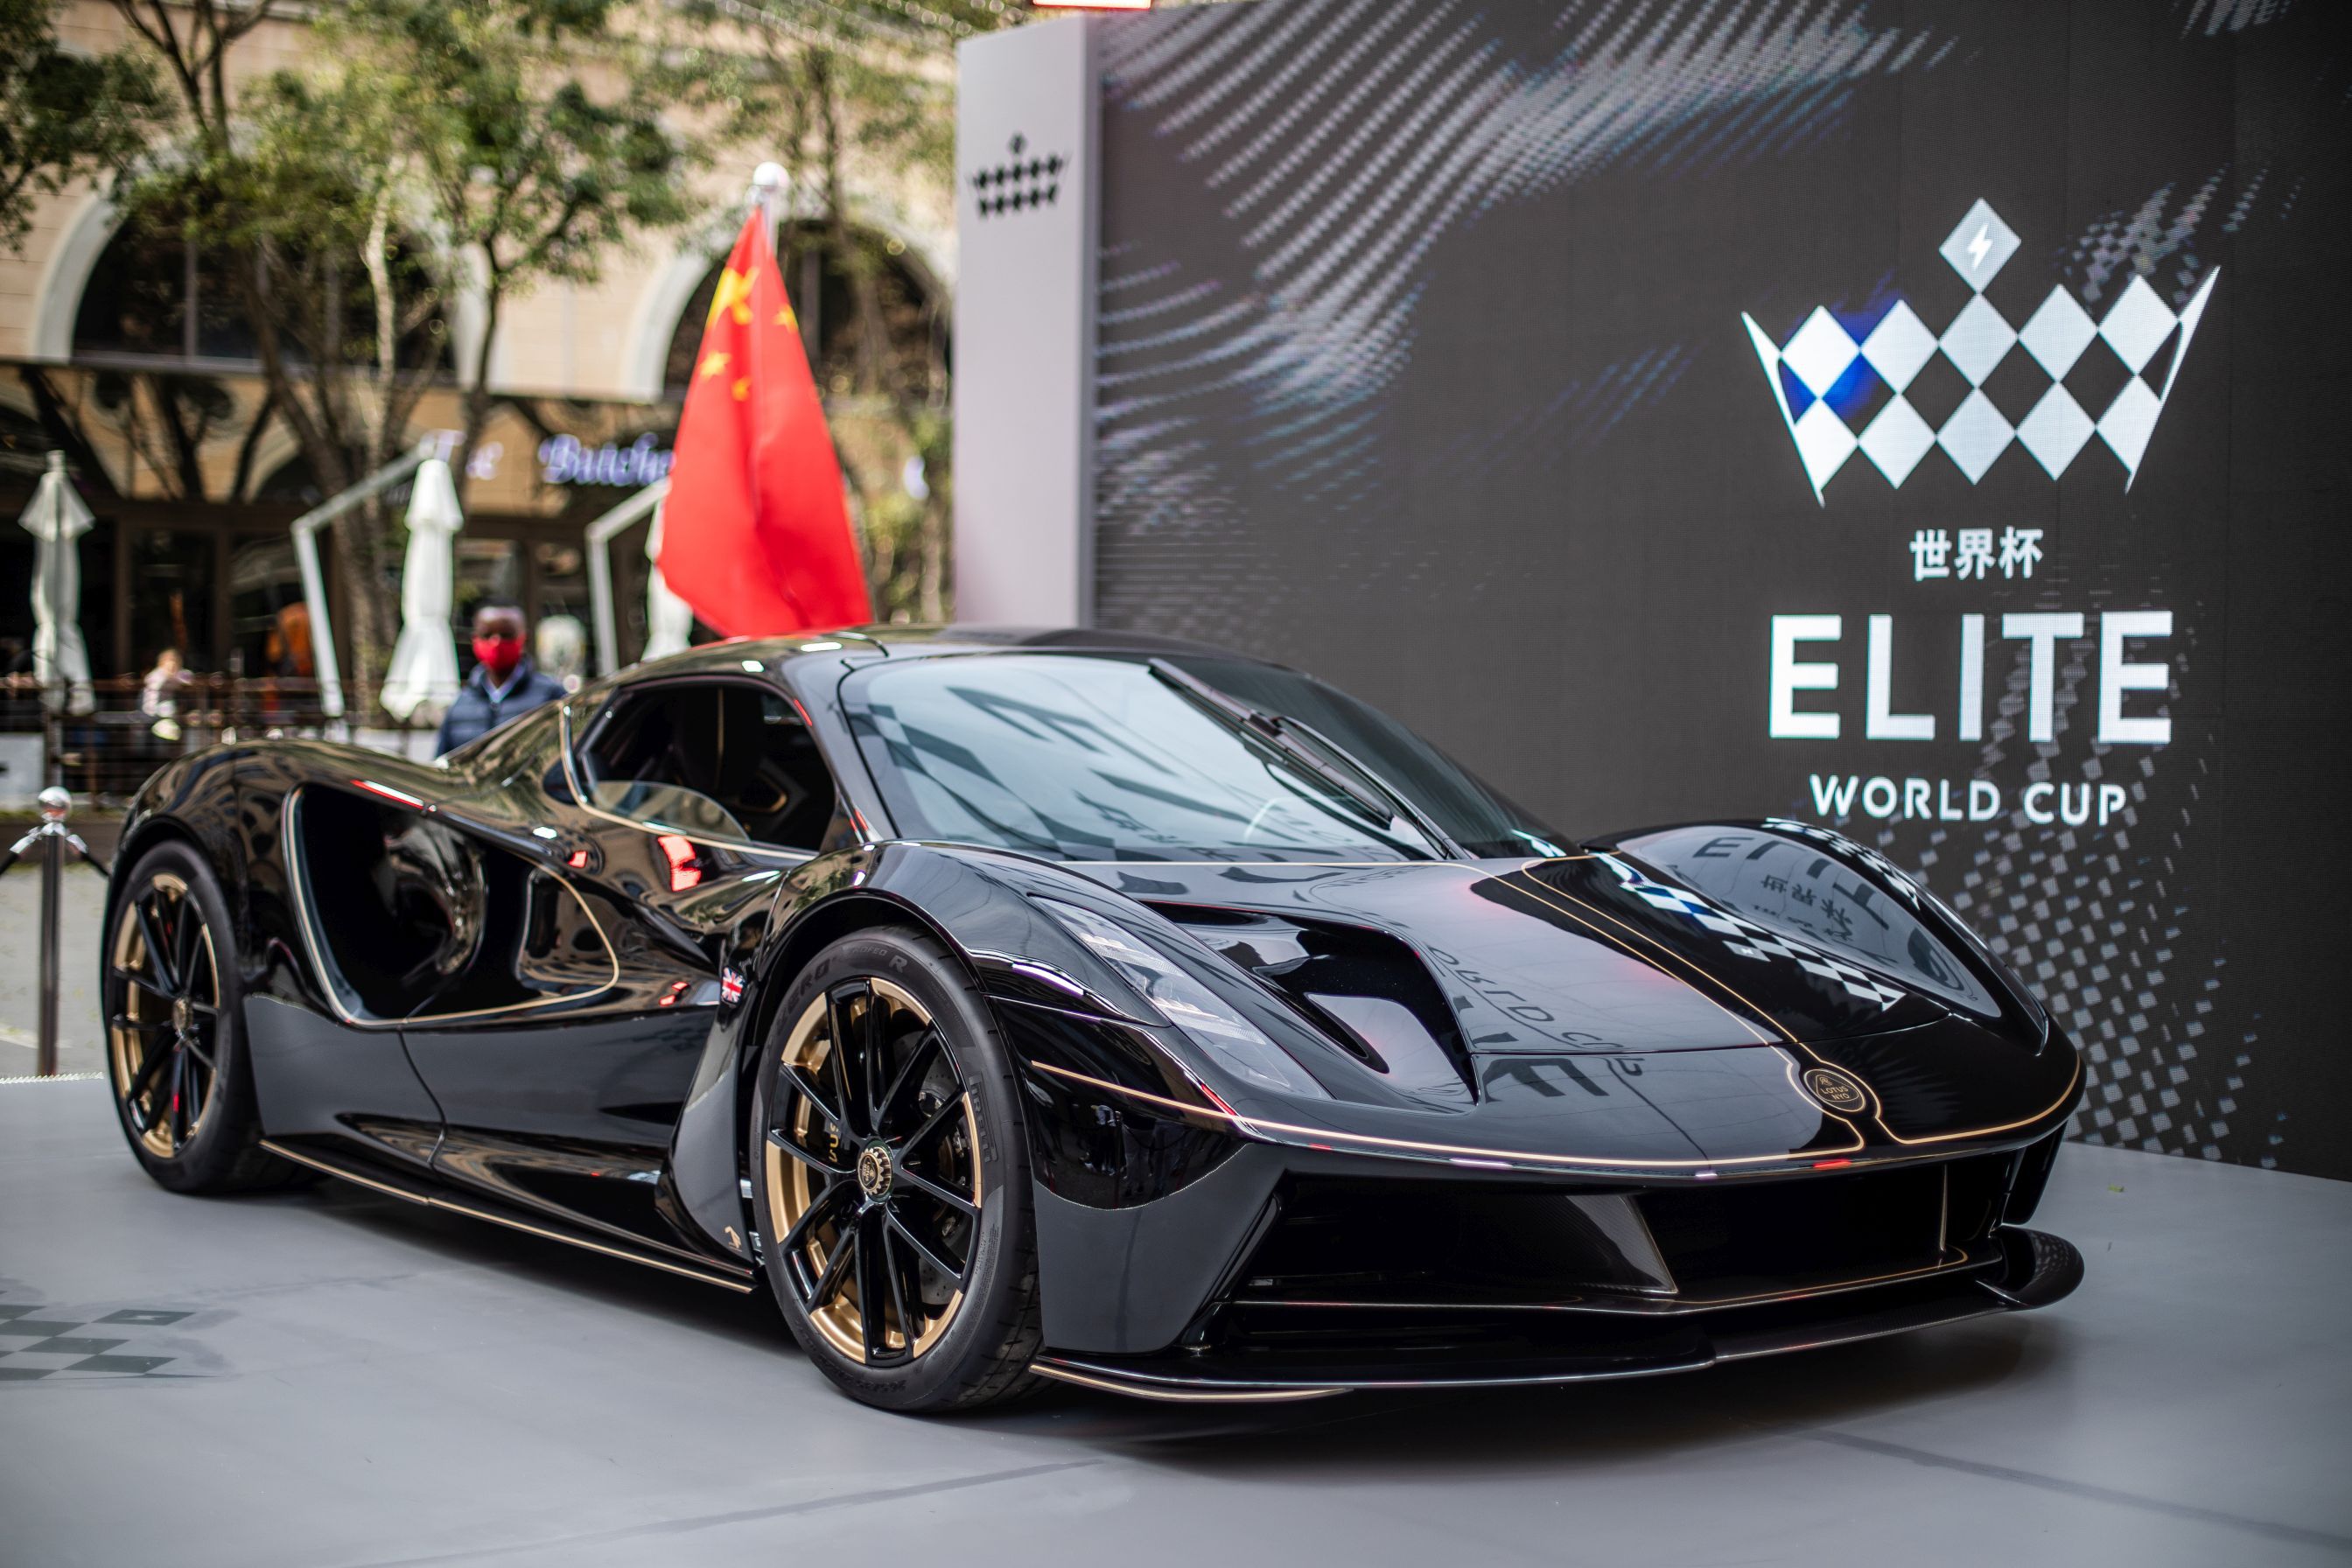 Elite motor sport series launched